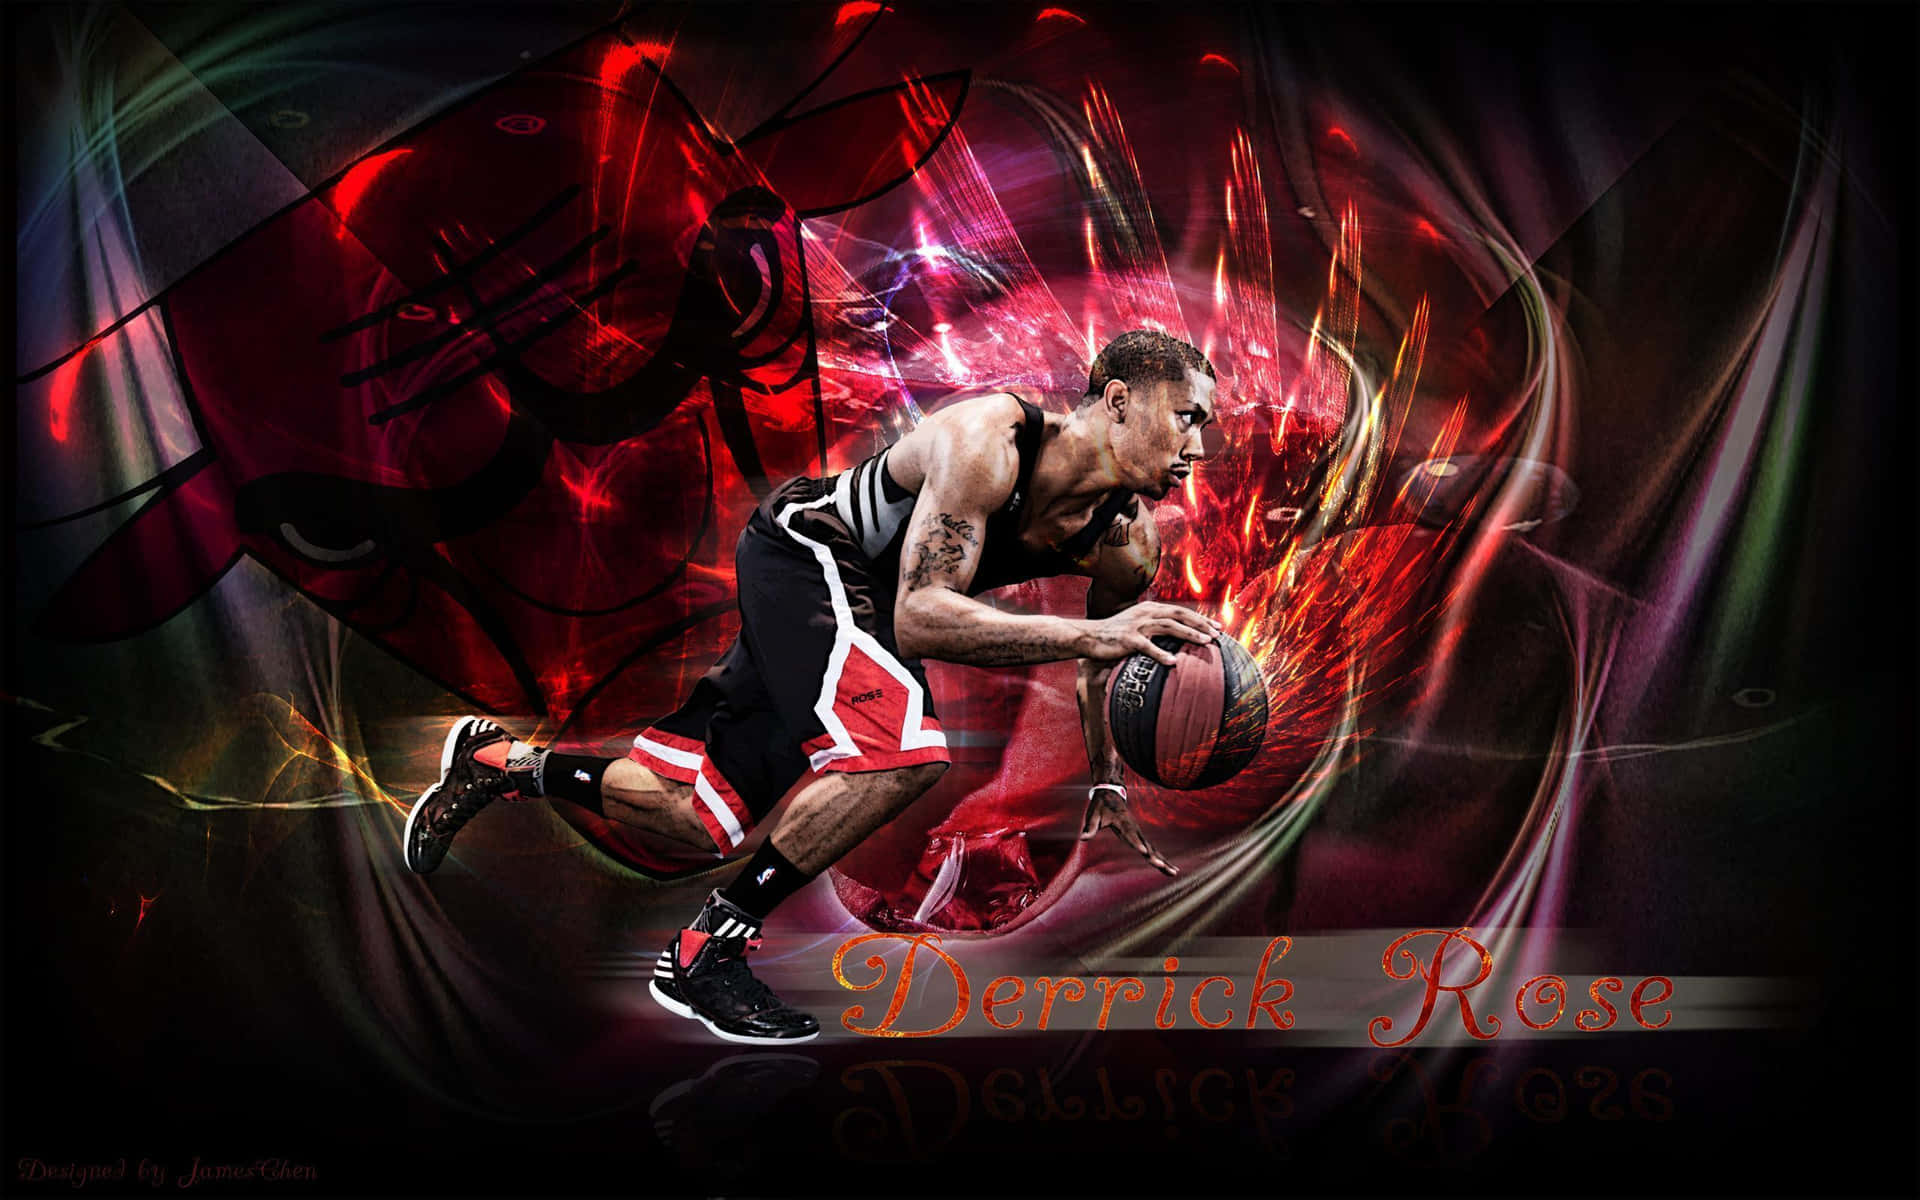 Derrick Rose stands in front of the hoop ready to make a shot. Wallpaper